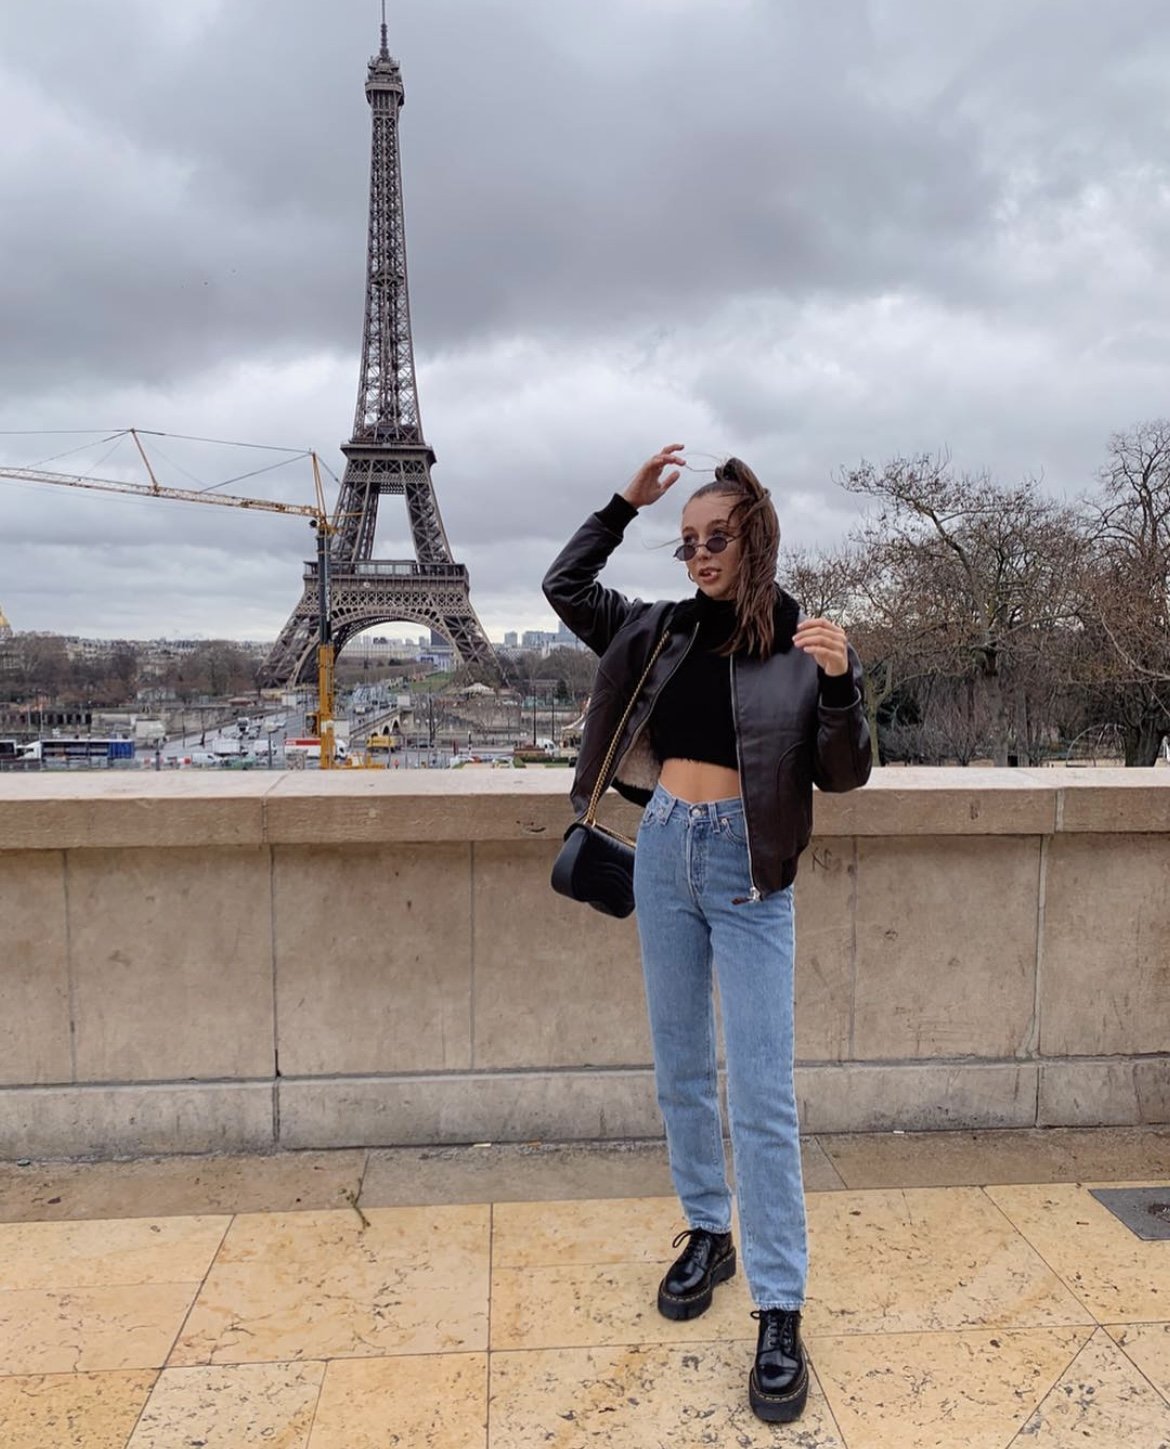 Emma Chamberlain's Fashion Evolution, From 2017 To Now, In